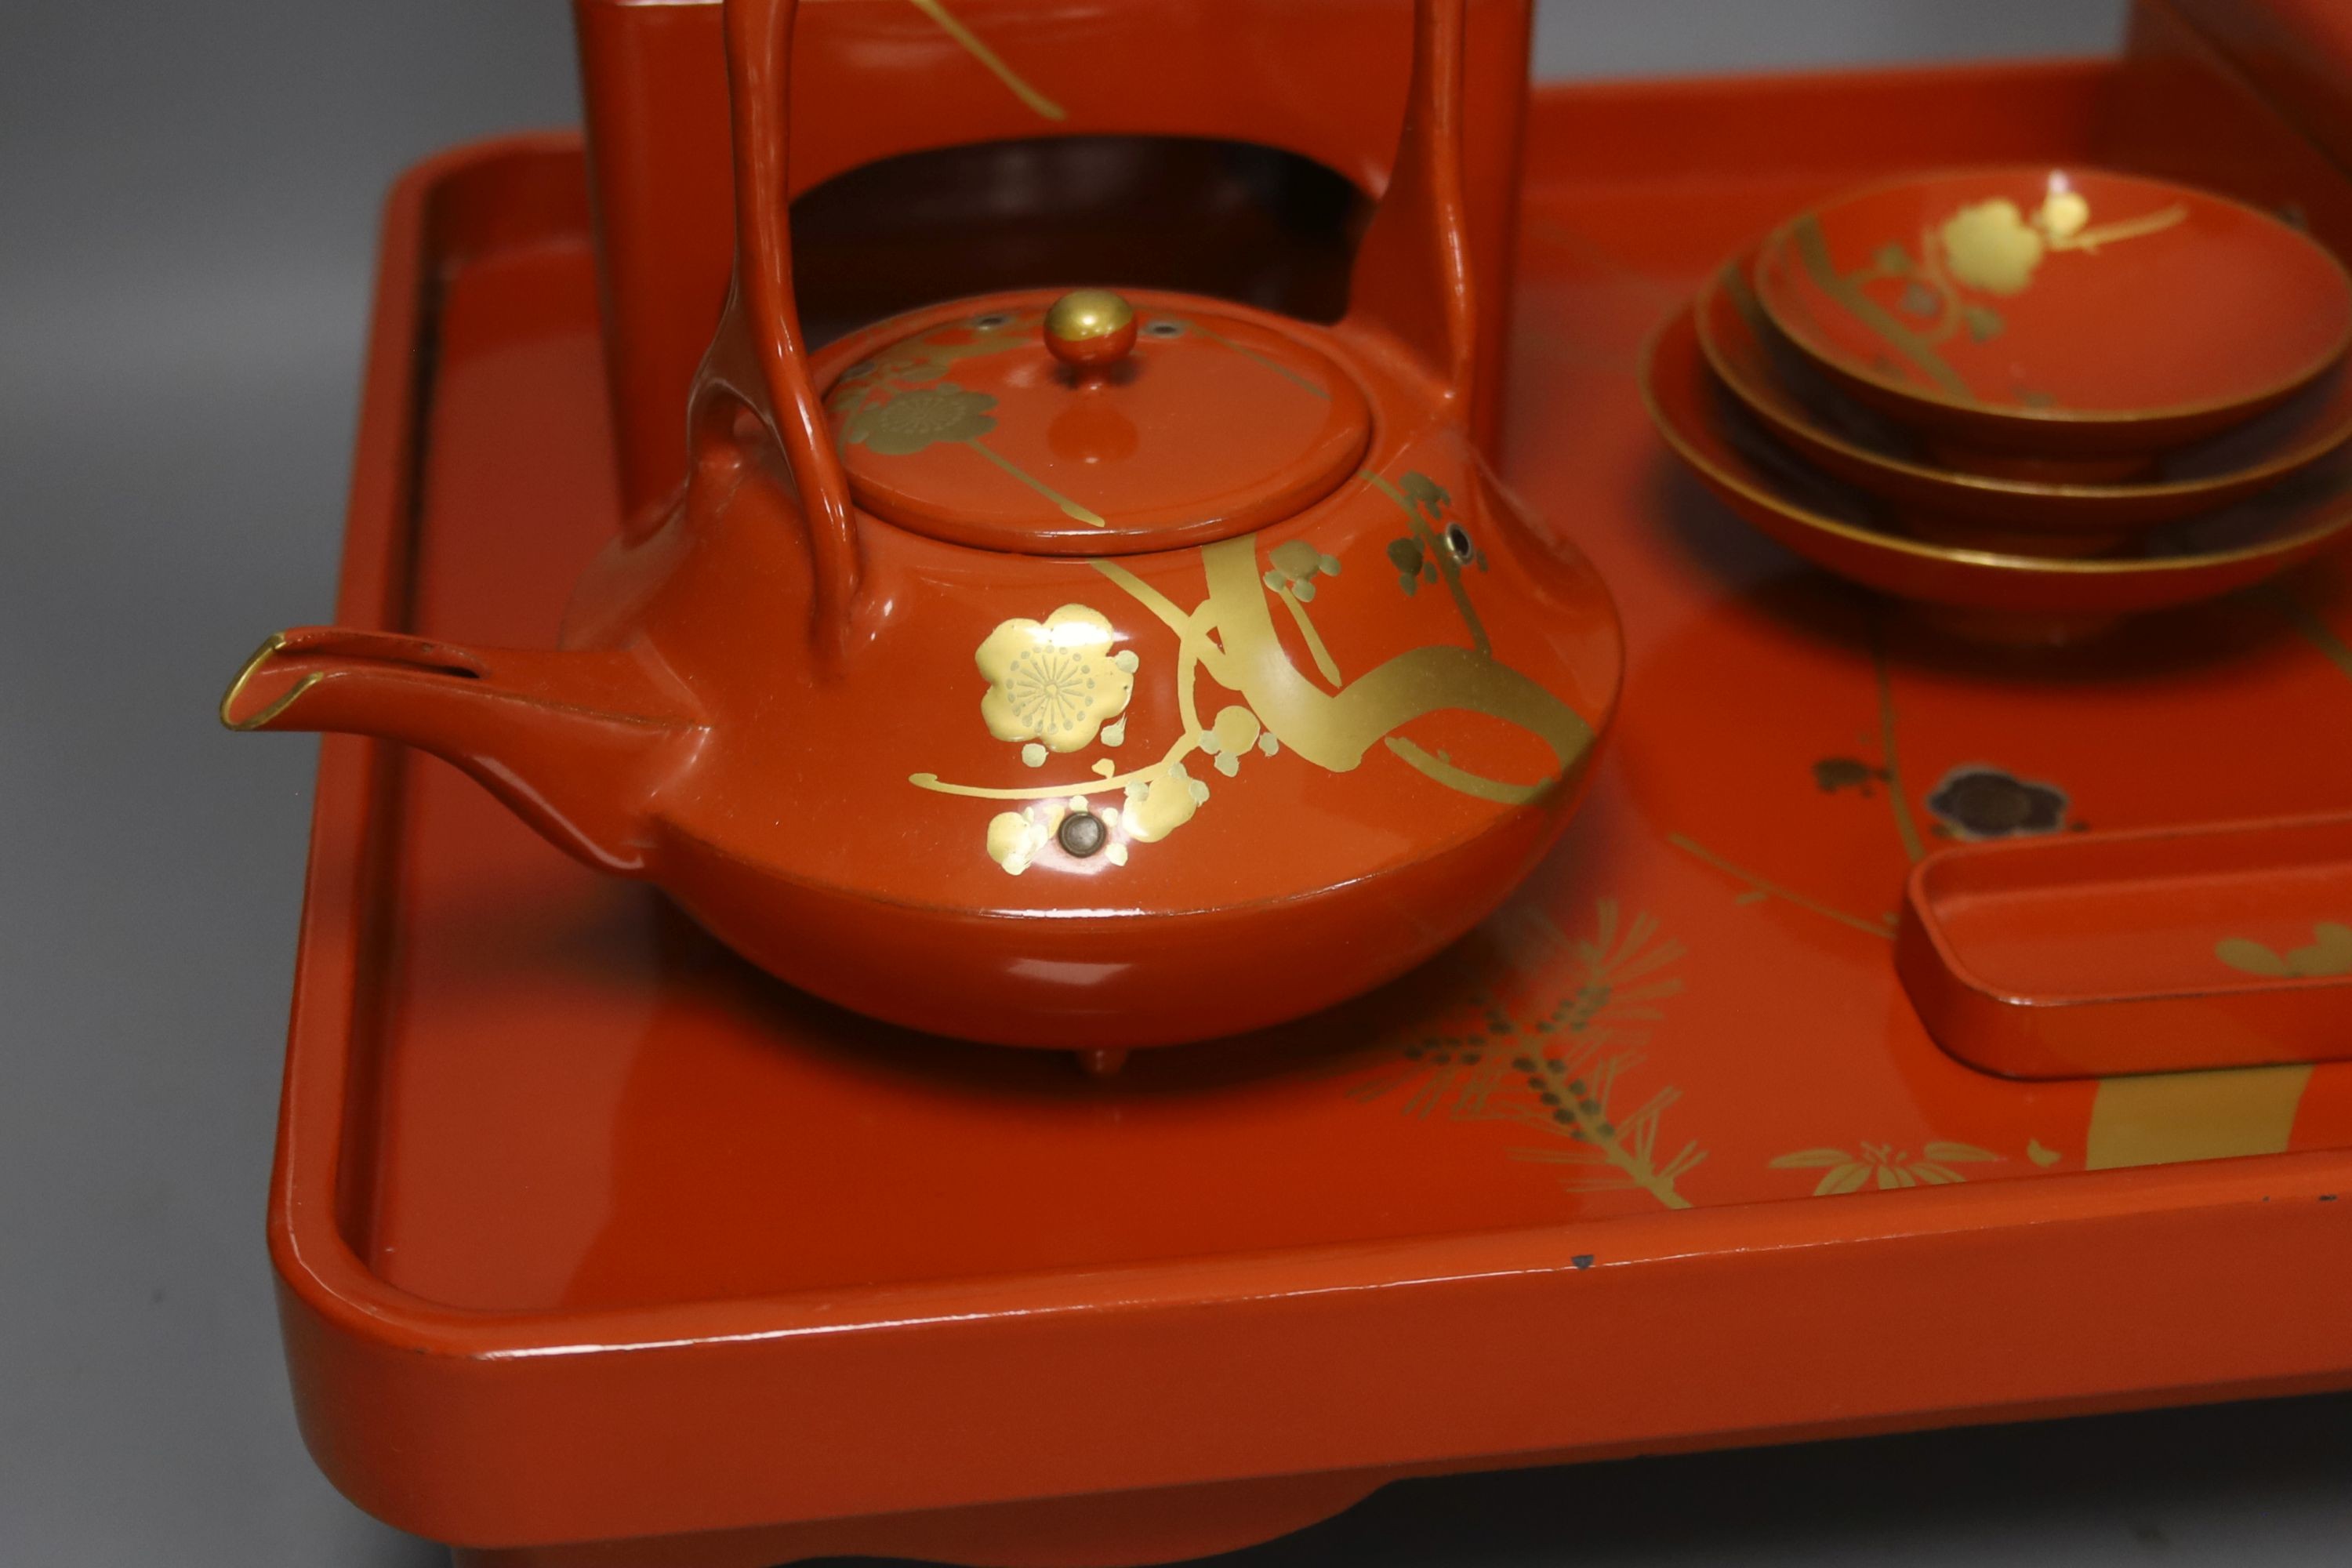 A Japanese red lacquer ceremonial sake set